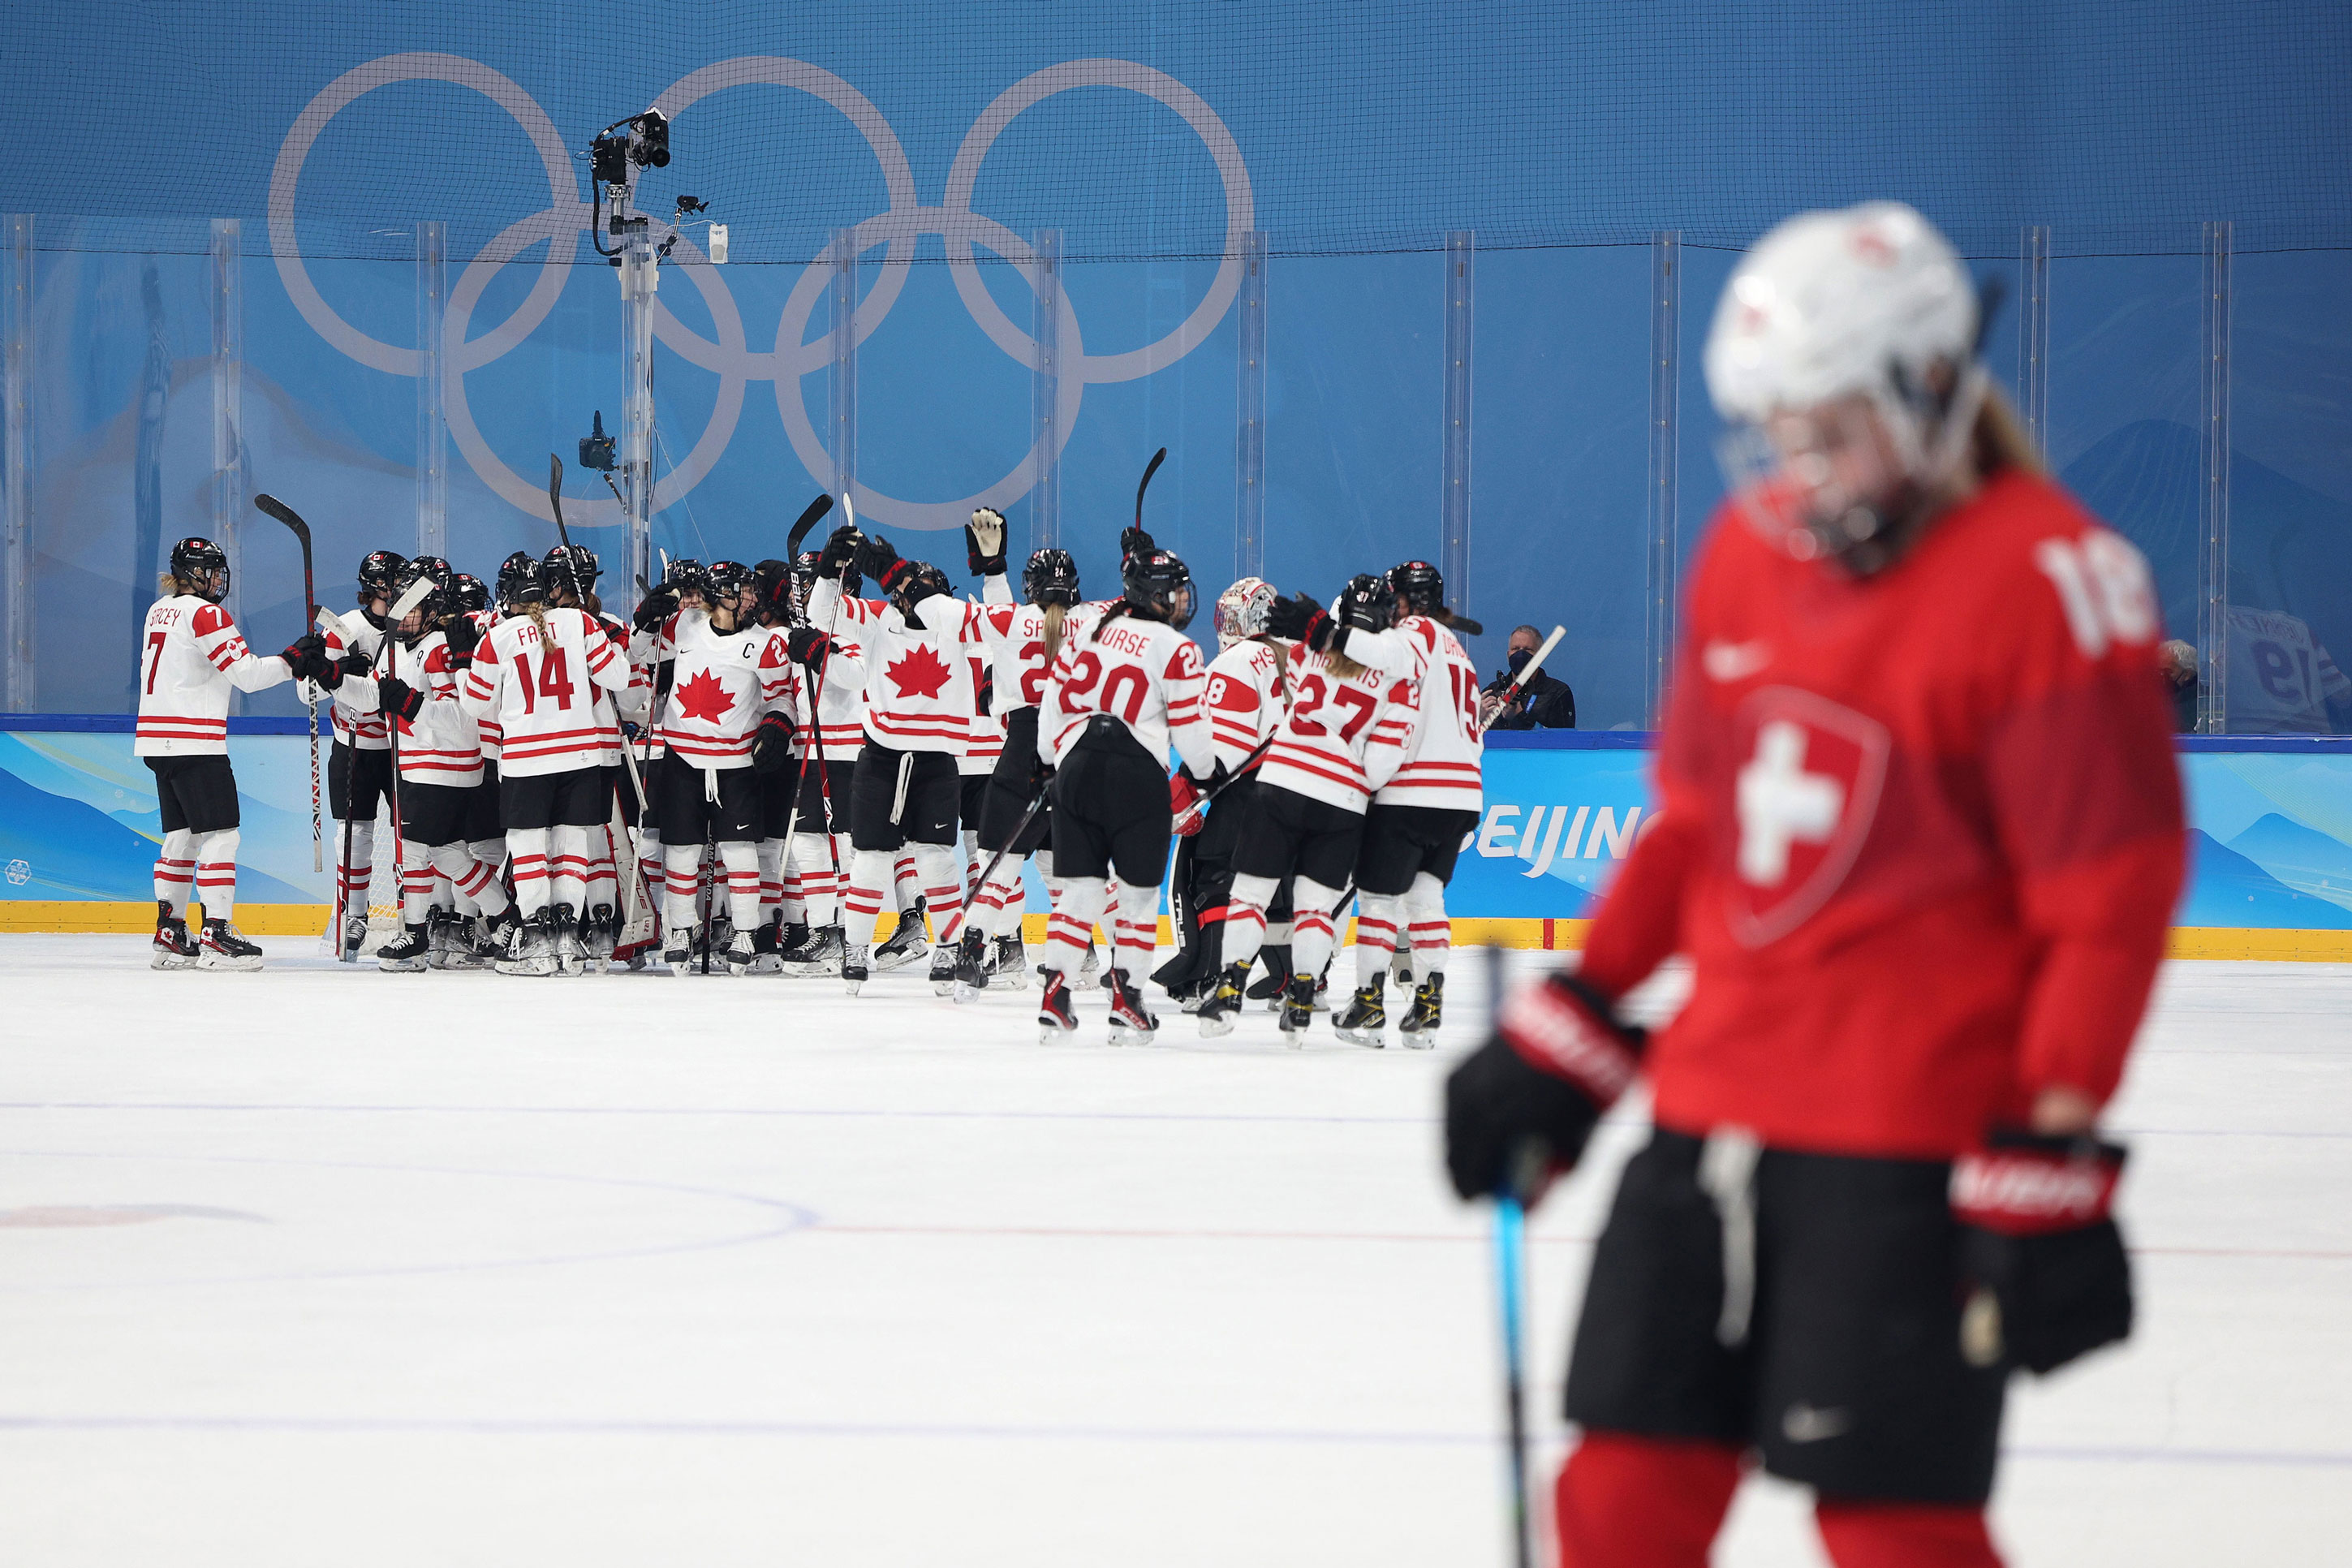 Team Canada celebrate after their 10-3 win against Switzerland in the women's ice hockey semifinals on Monday.